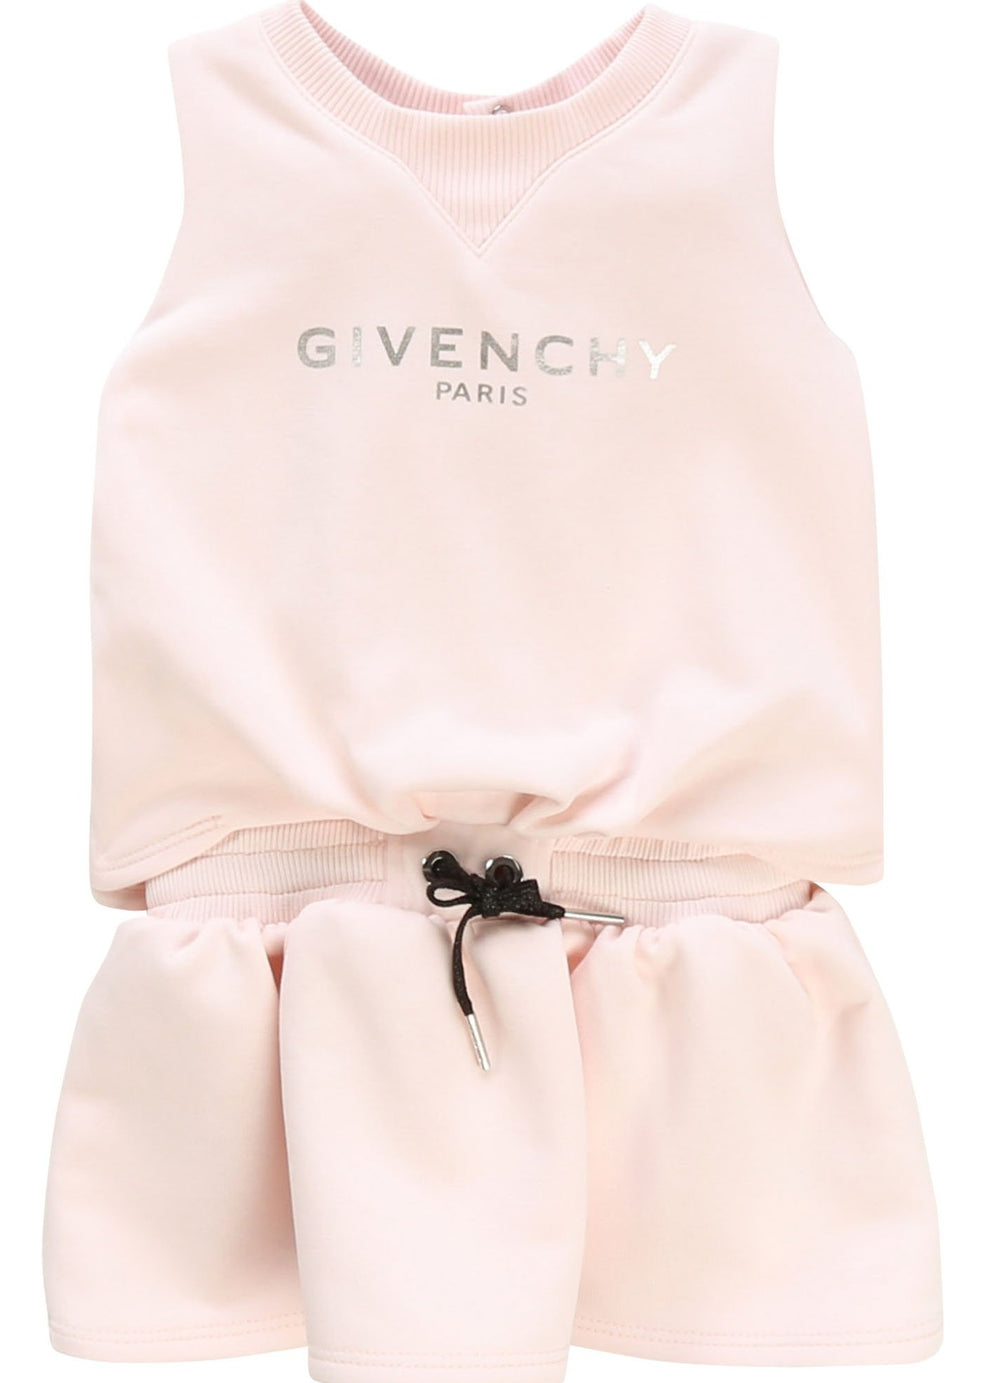 baby givenchy dress